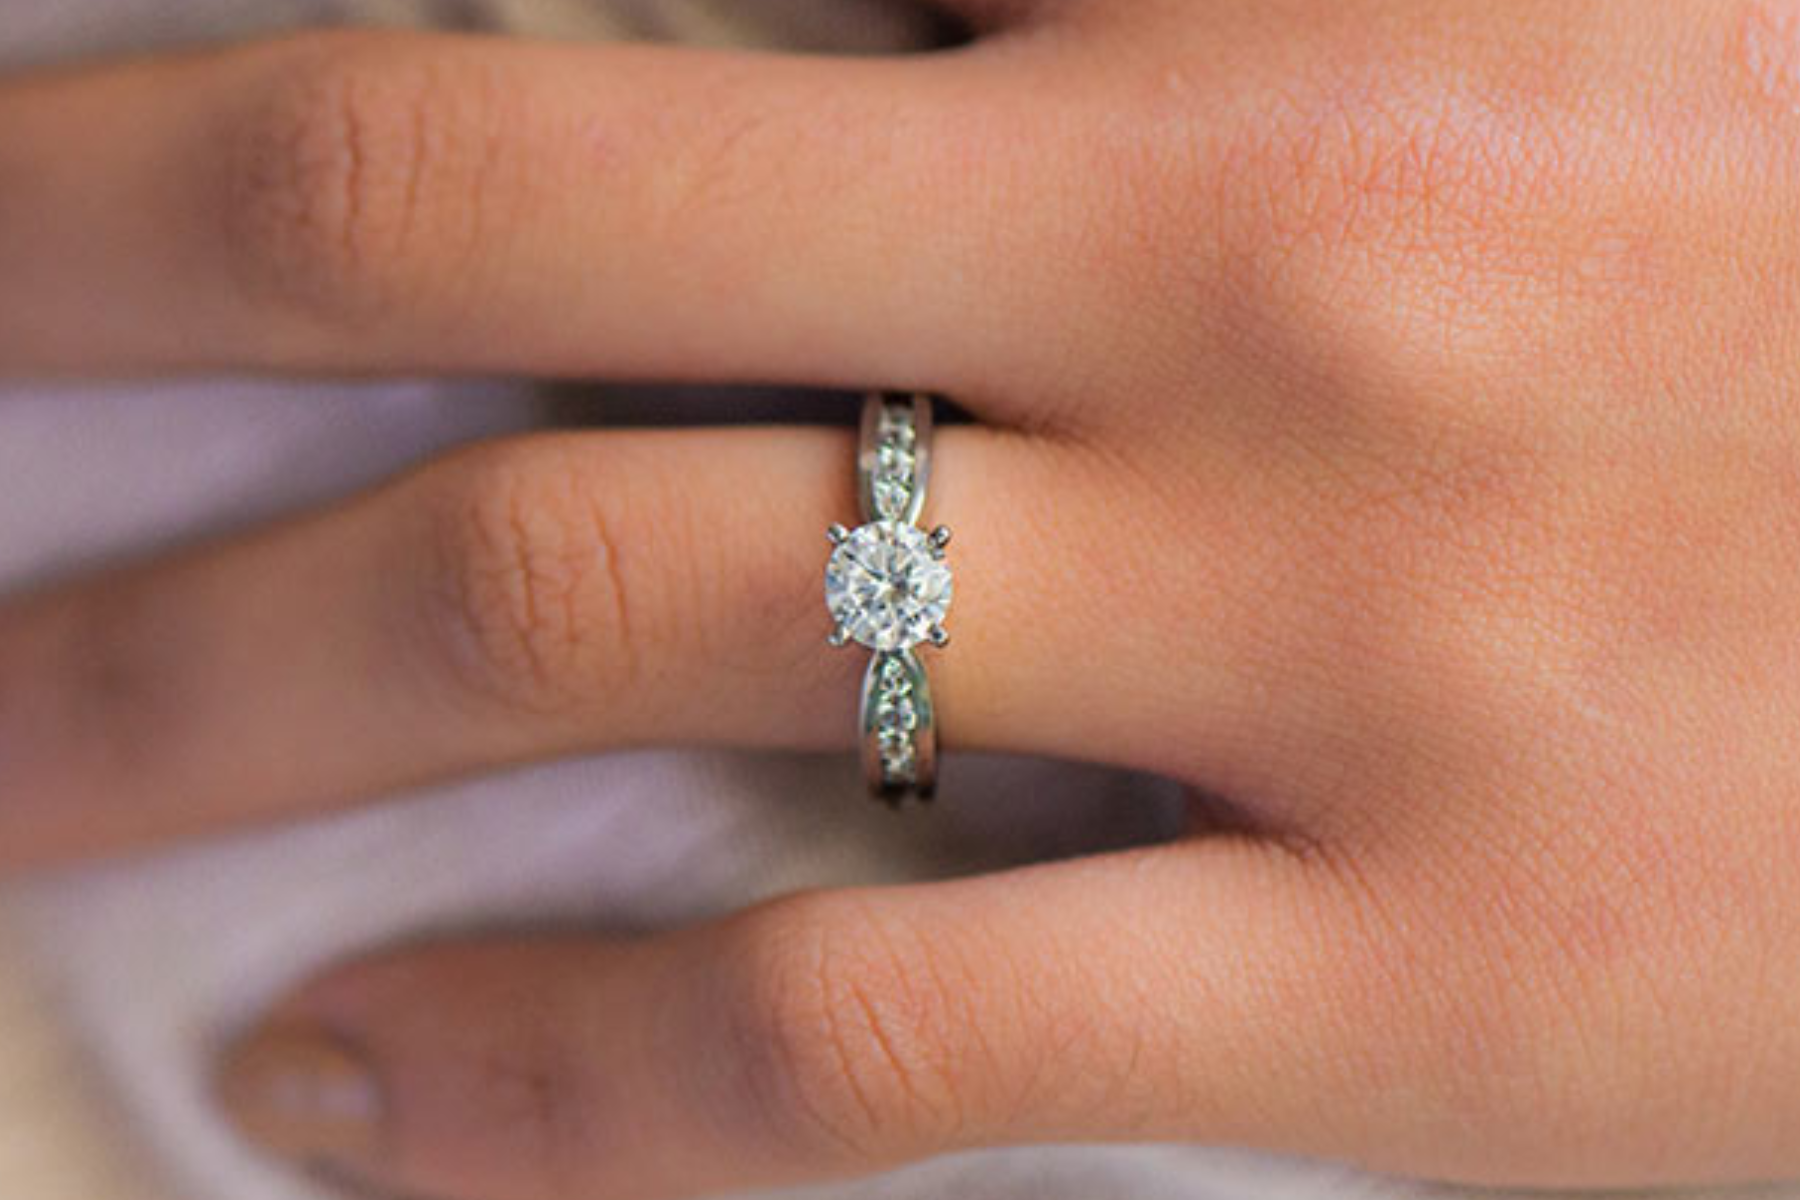 The ring finger of a woman wearing a platinum engagement ring